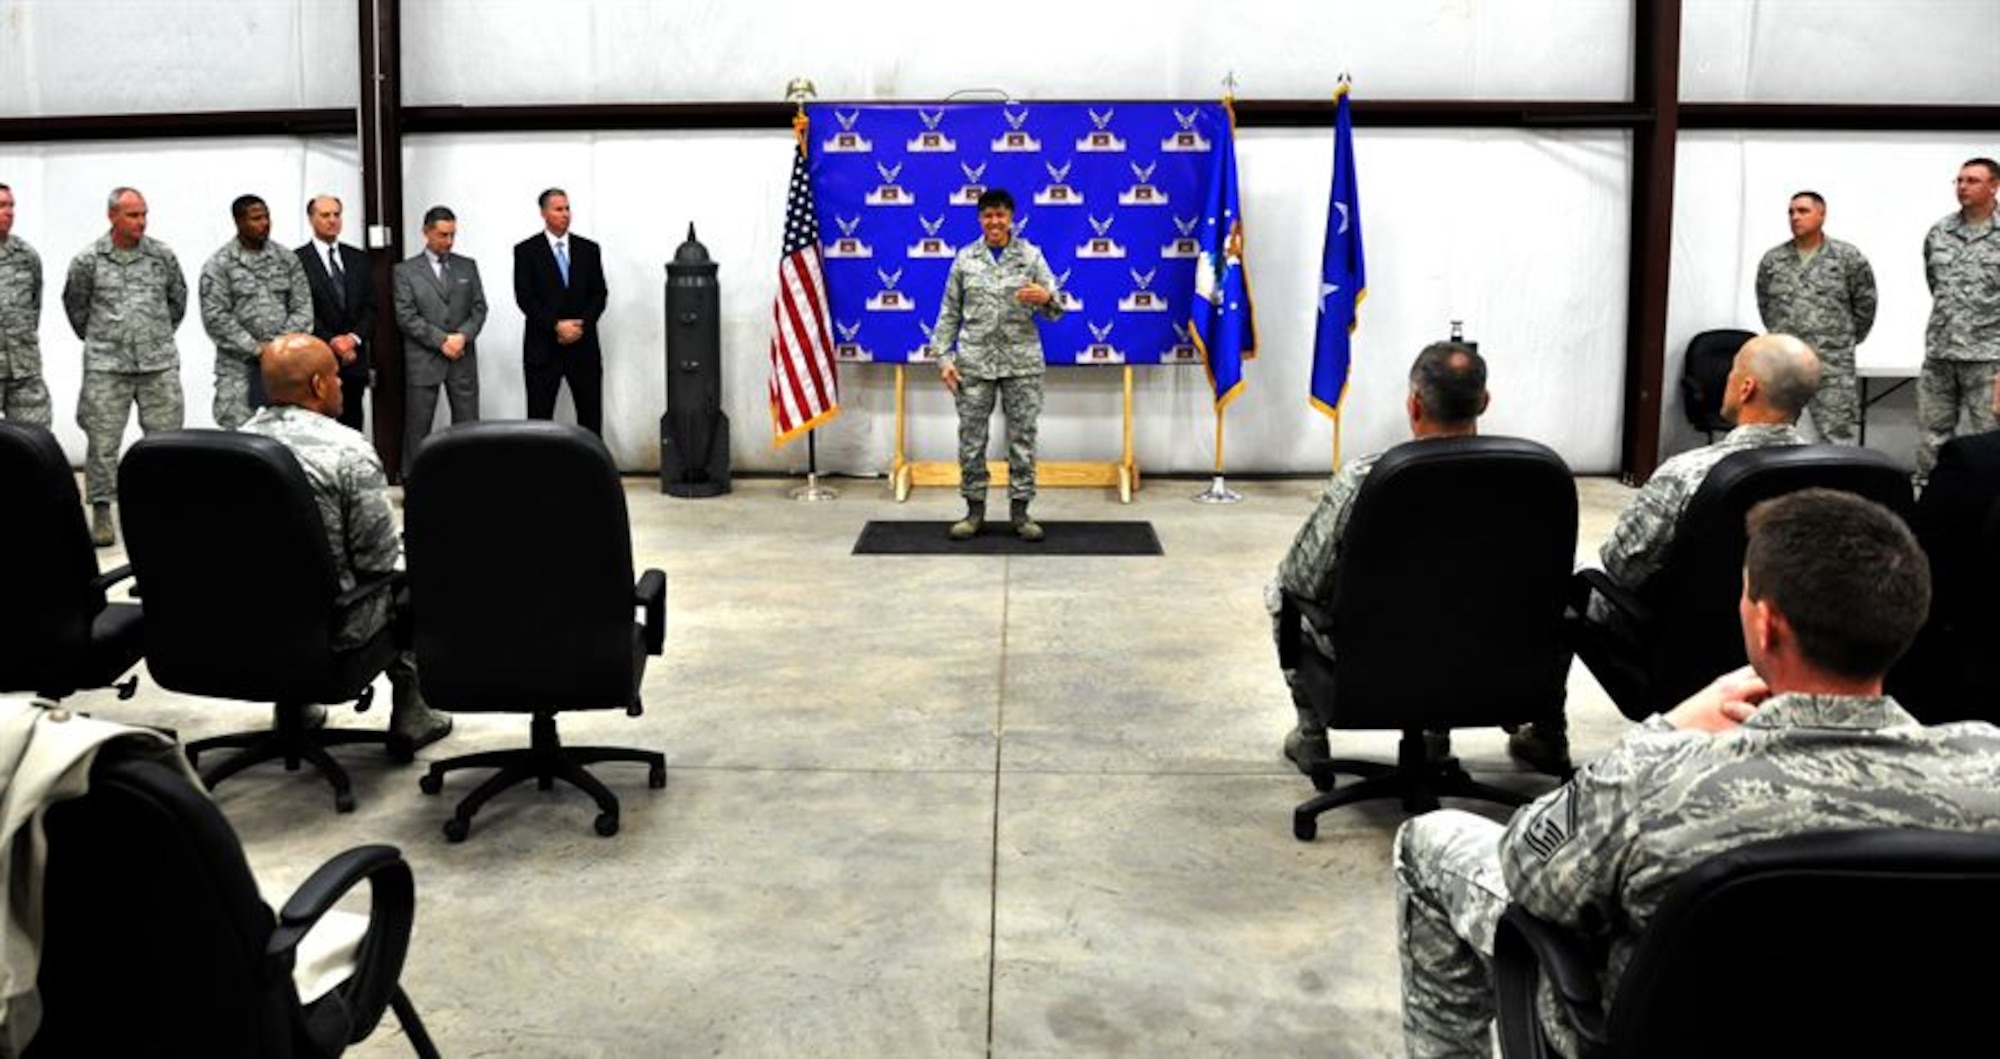 Maj. Gen. Stayce Harris, 22nd Air Force commander, speaks to Tractor Trailer Training, or 3T, graduates at the recent graduation ceremony at Dobbins Air Reserve Base, Georgia. The Professional Truck Driver’s Institute granted its certification to the 3T program and these graduates are the first to receive the PTDI Seal of Attainment.  (U.S. Air Force photo/Senior Airman Daniel Phelps)